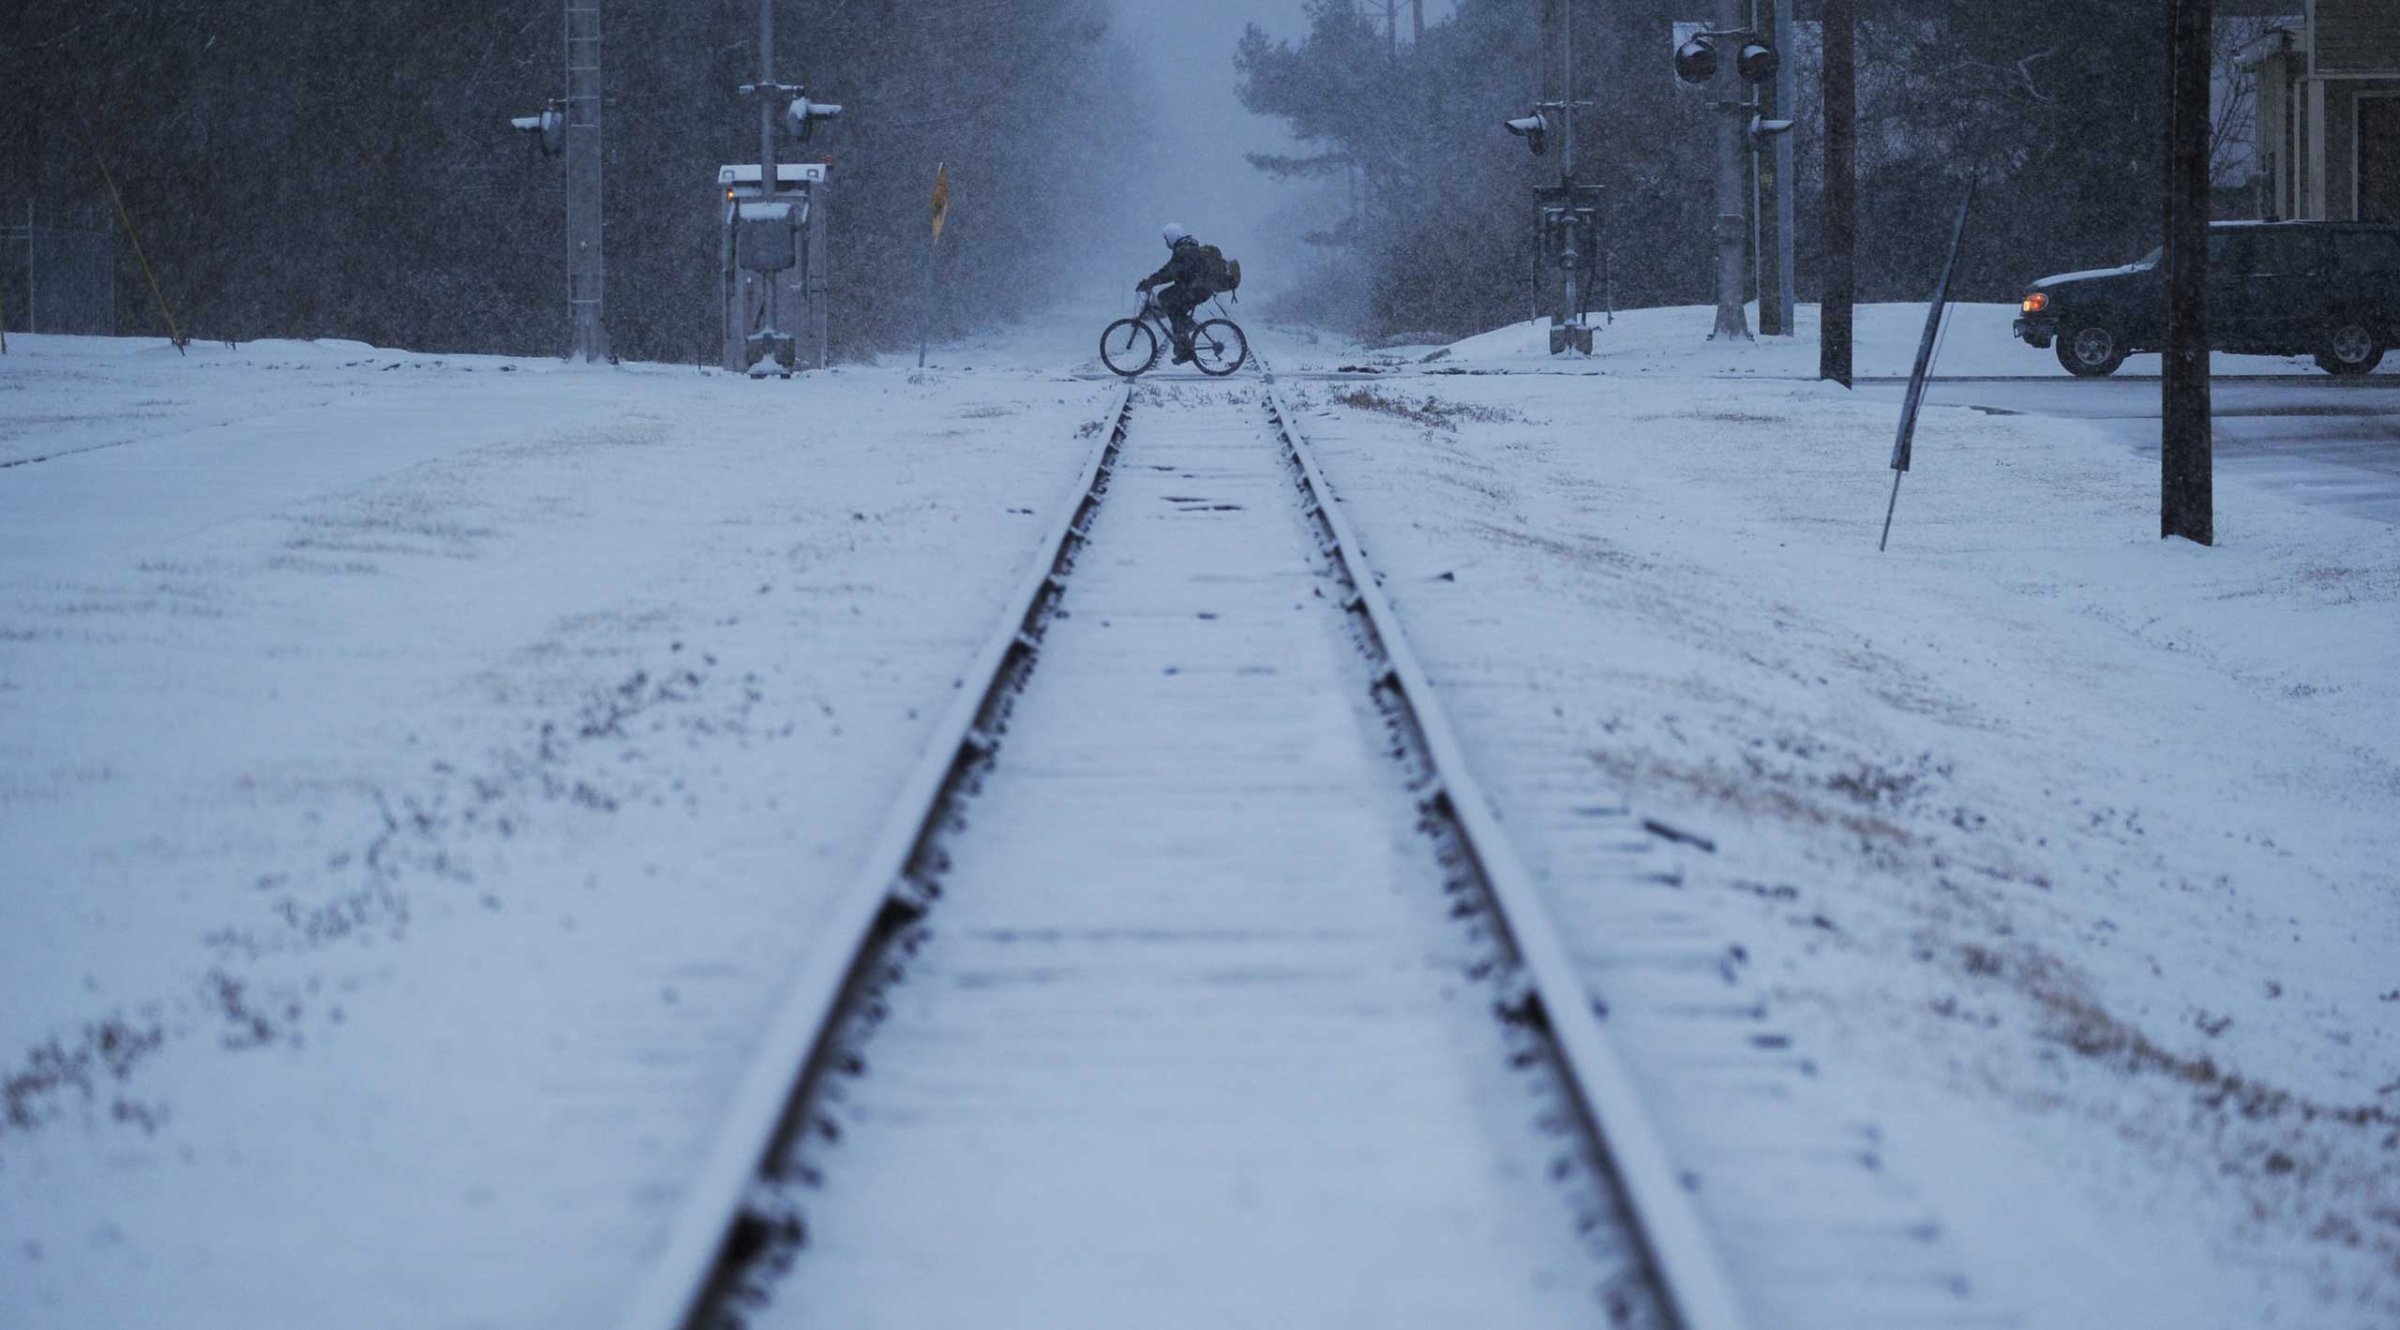 A man rides his bicycle across the railroad tracks in Exmore, Va. as snow falls, Feb. 24, 2015.